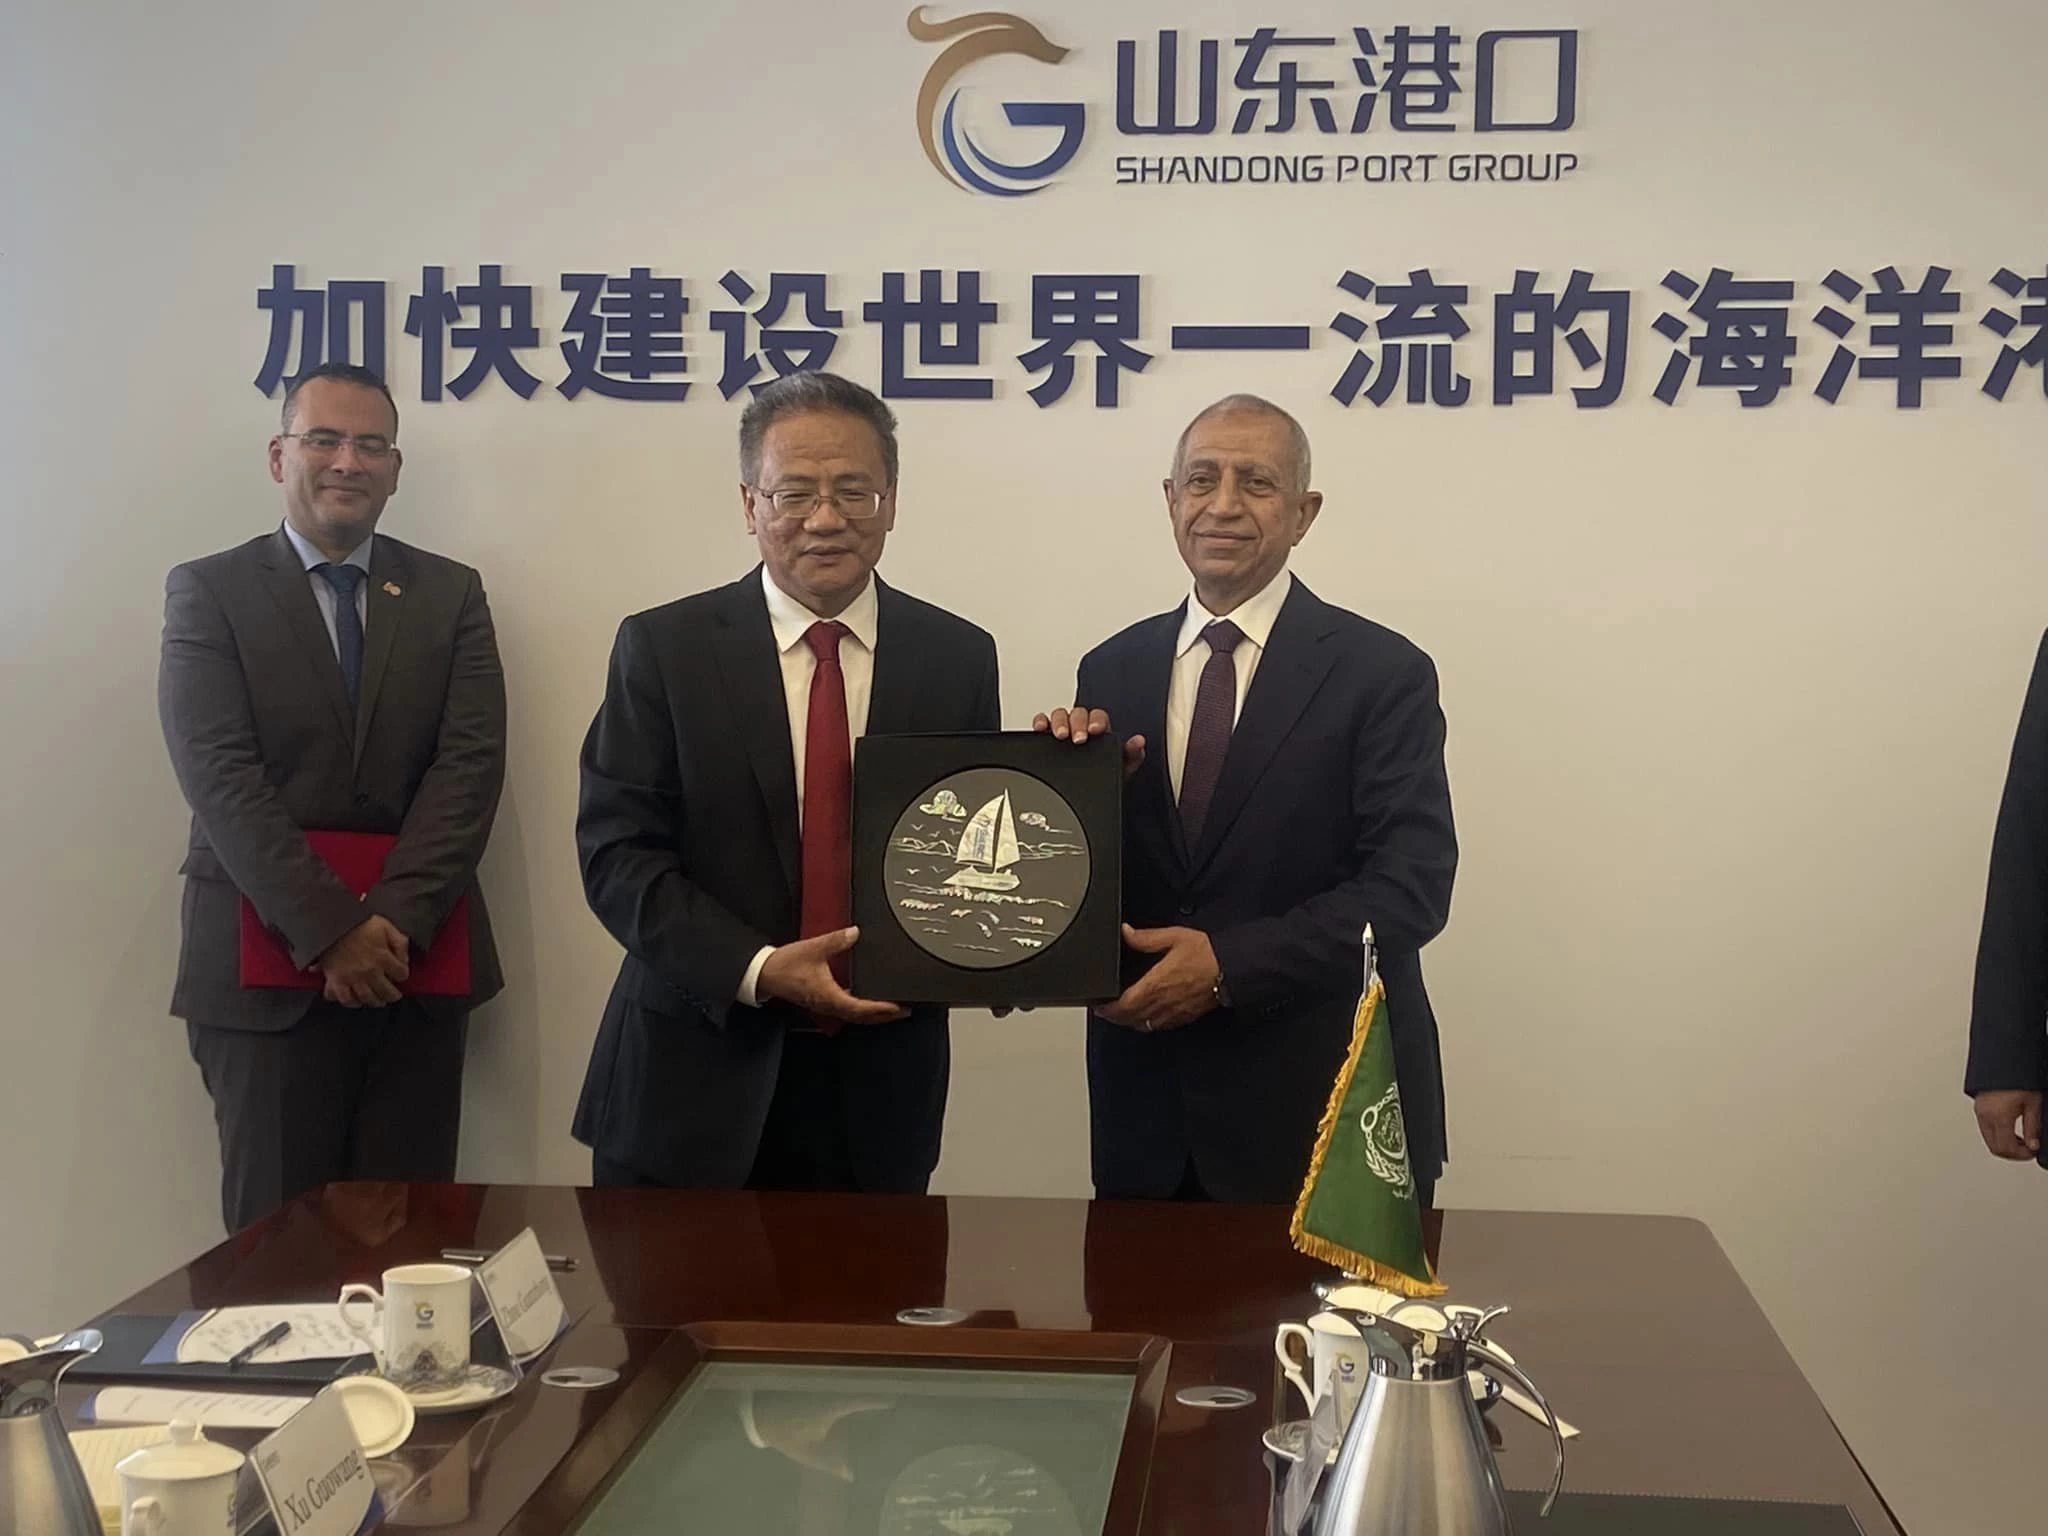 Signing of a Joint Cooperation Agreement to Implement the First Technical Diploma in Port Logistics, Maintenance, and Operation of Port Equipment, in Collaboration Between Port Training Institute and Qingdao Harbour Vocational & Technical College.3